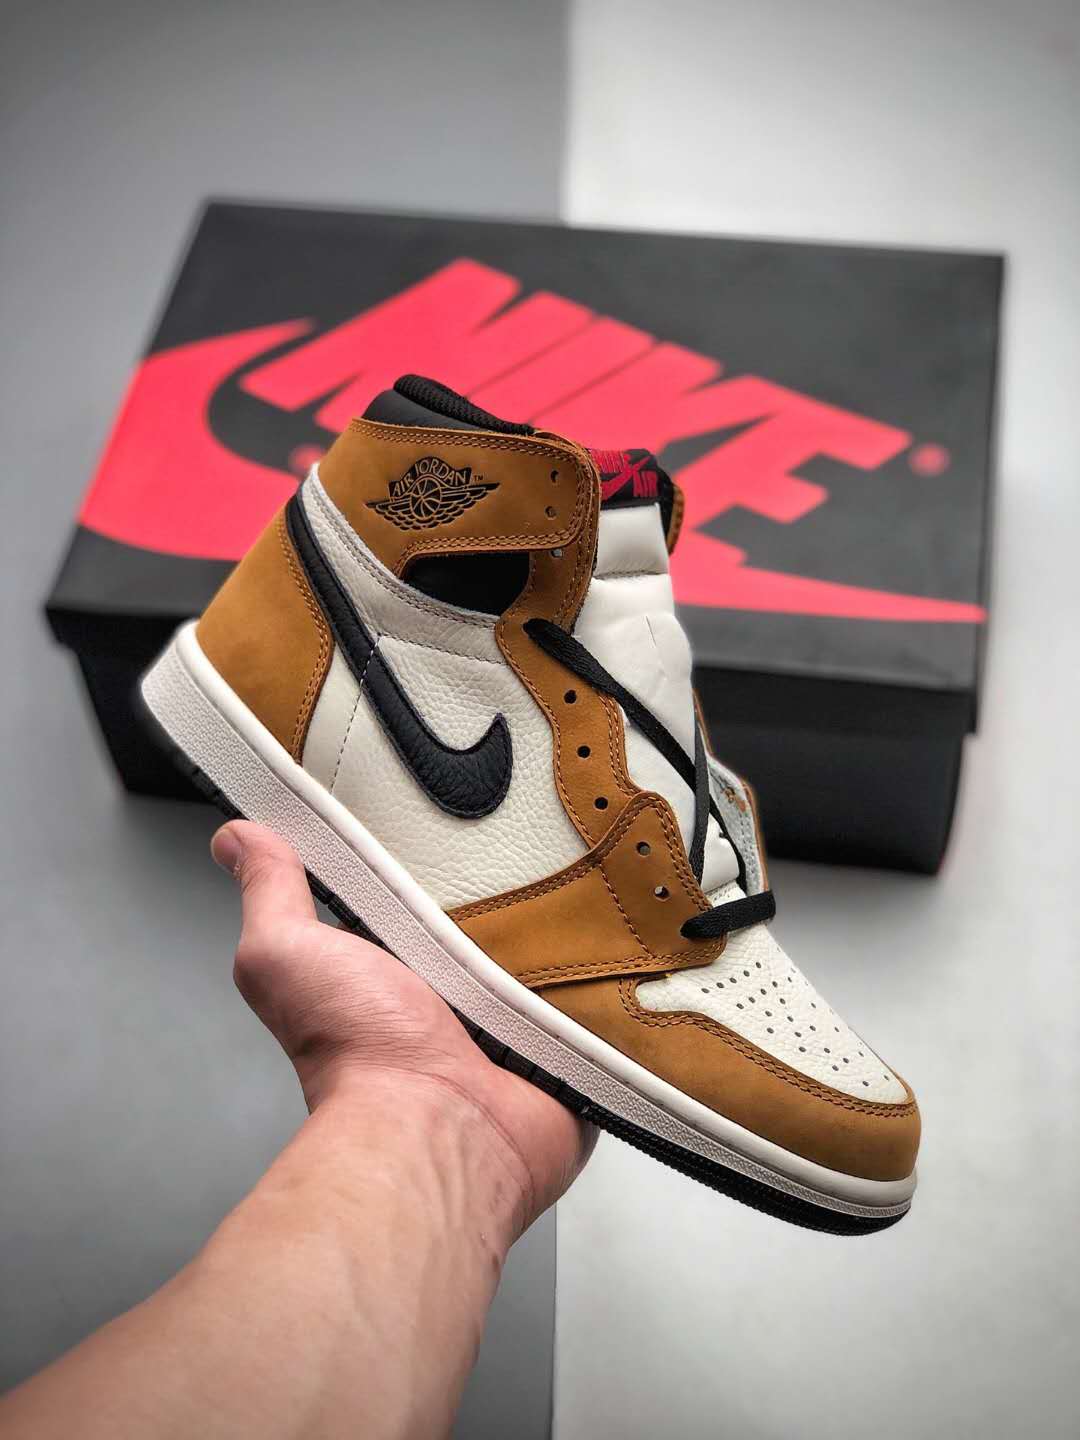 Air Jordan 1 Retro High OG 'Rookie of the Year' - Limited Edition Sneaker